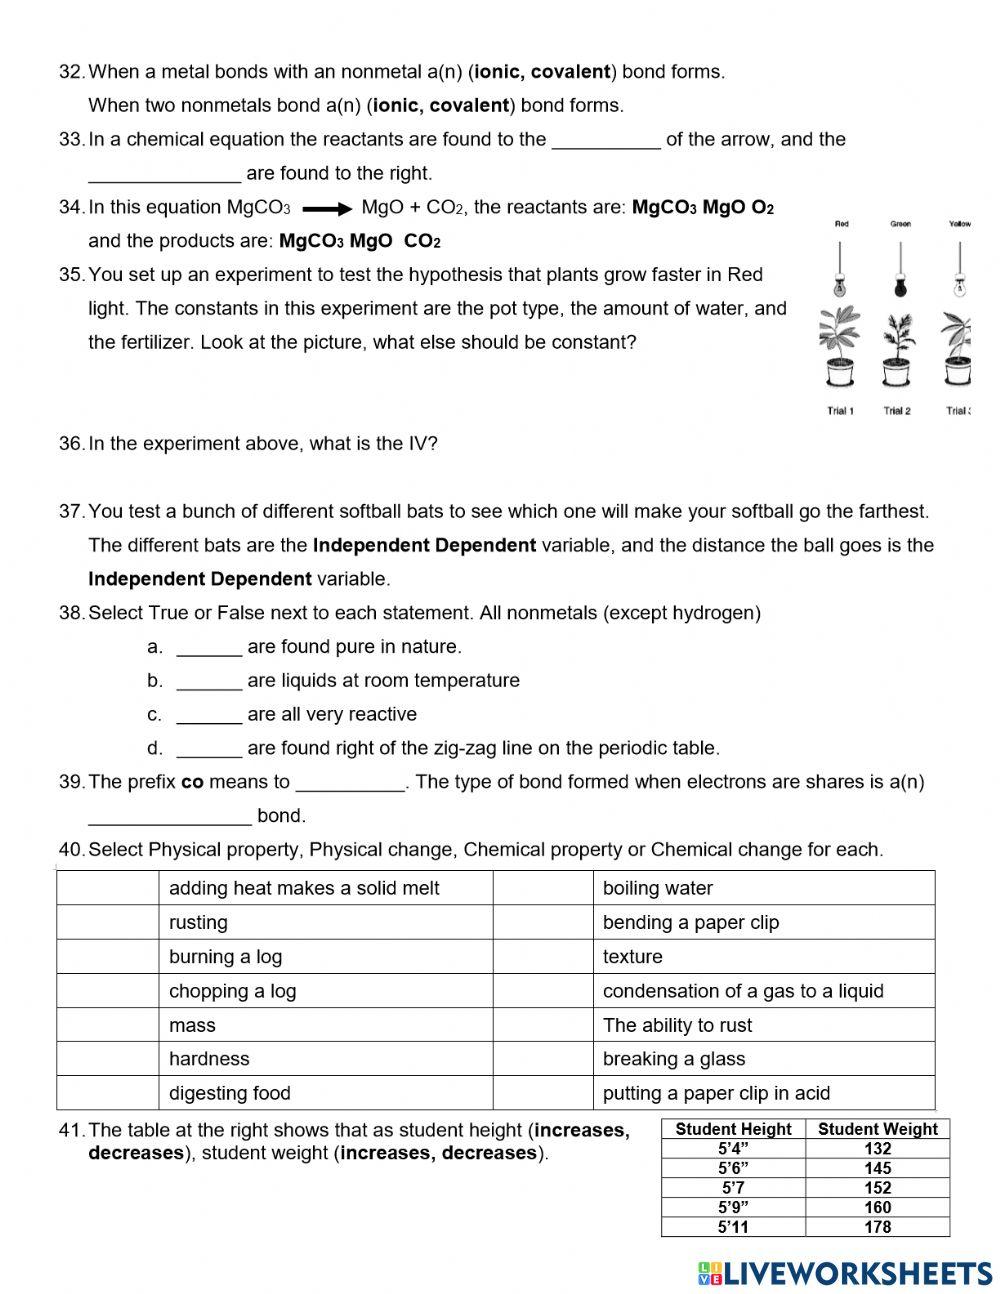 BM-3-Study Guide page 3-2021